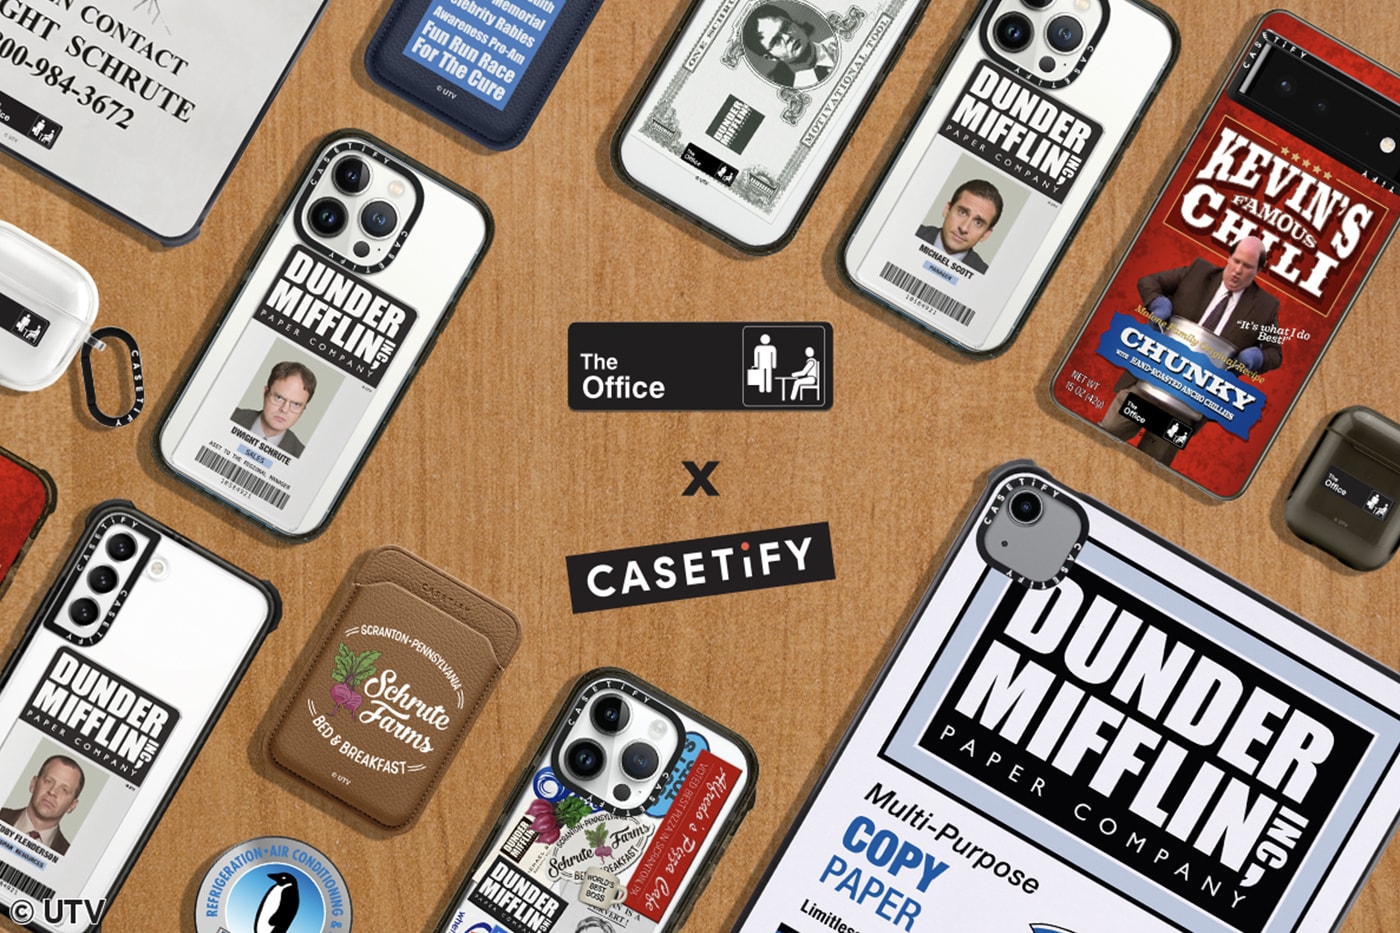 The Office' X Casetify Collection | Hypebeast